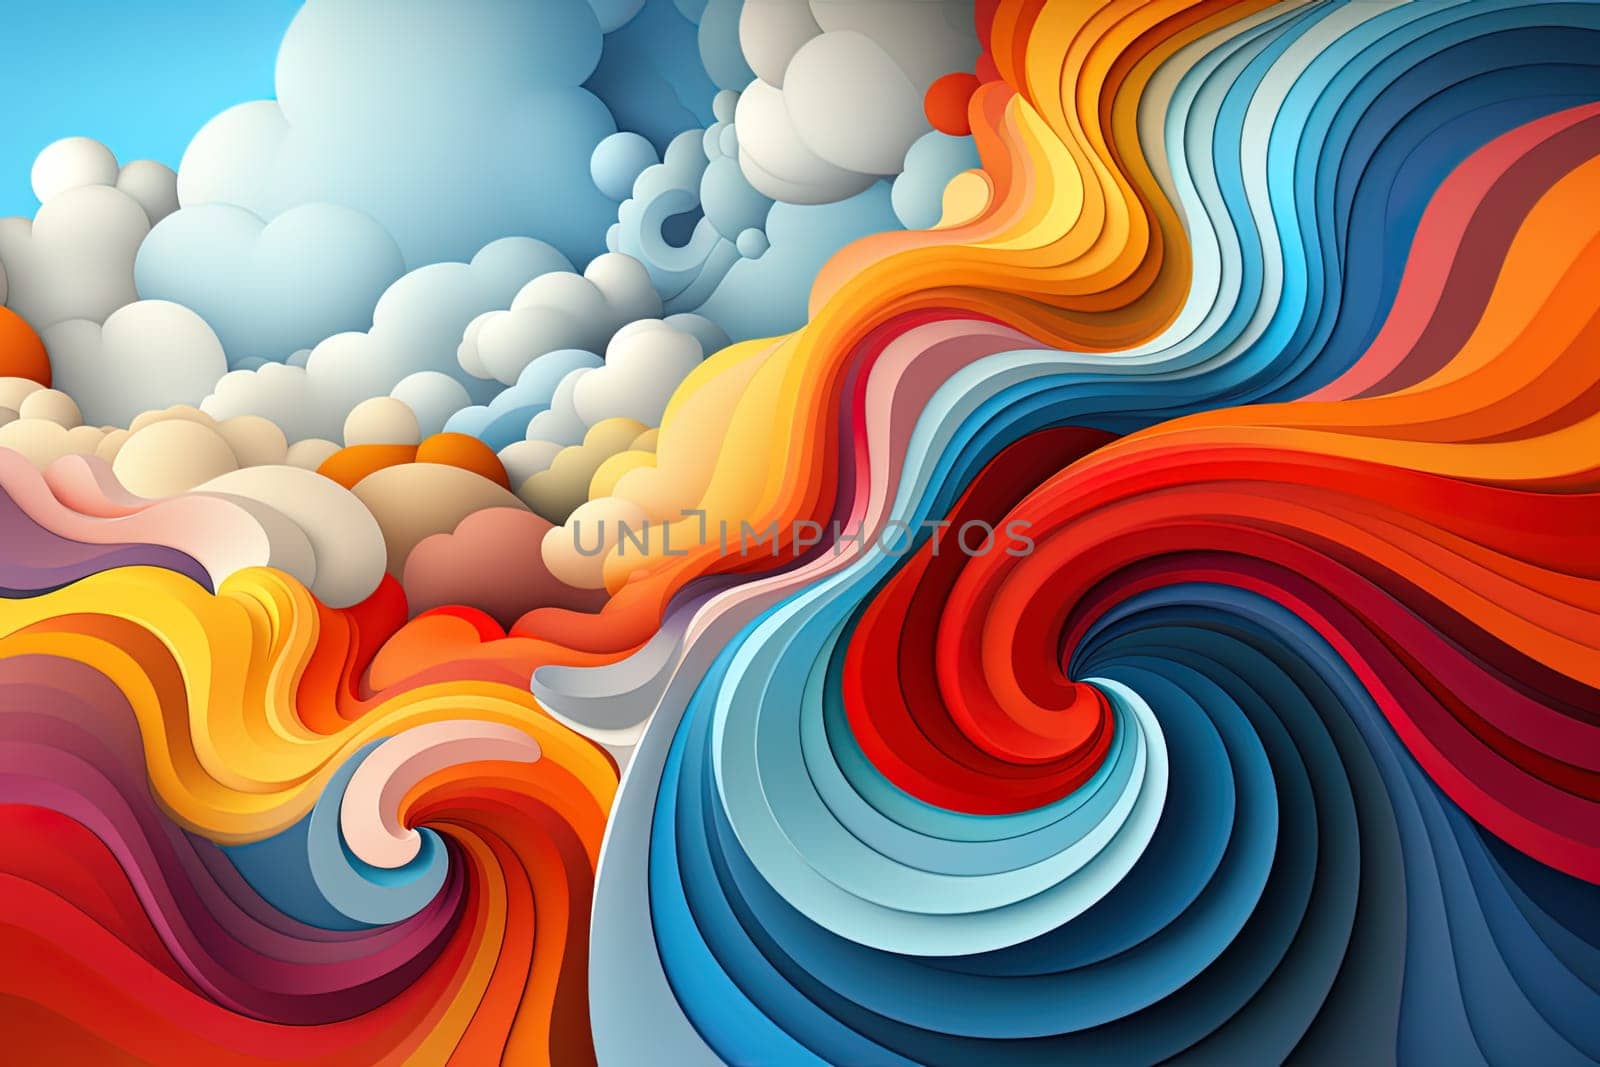 Surreal psychedelic retro groovy colorful vibrant background texture illustration